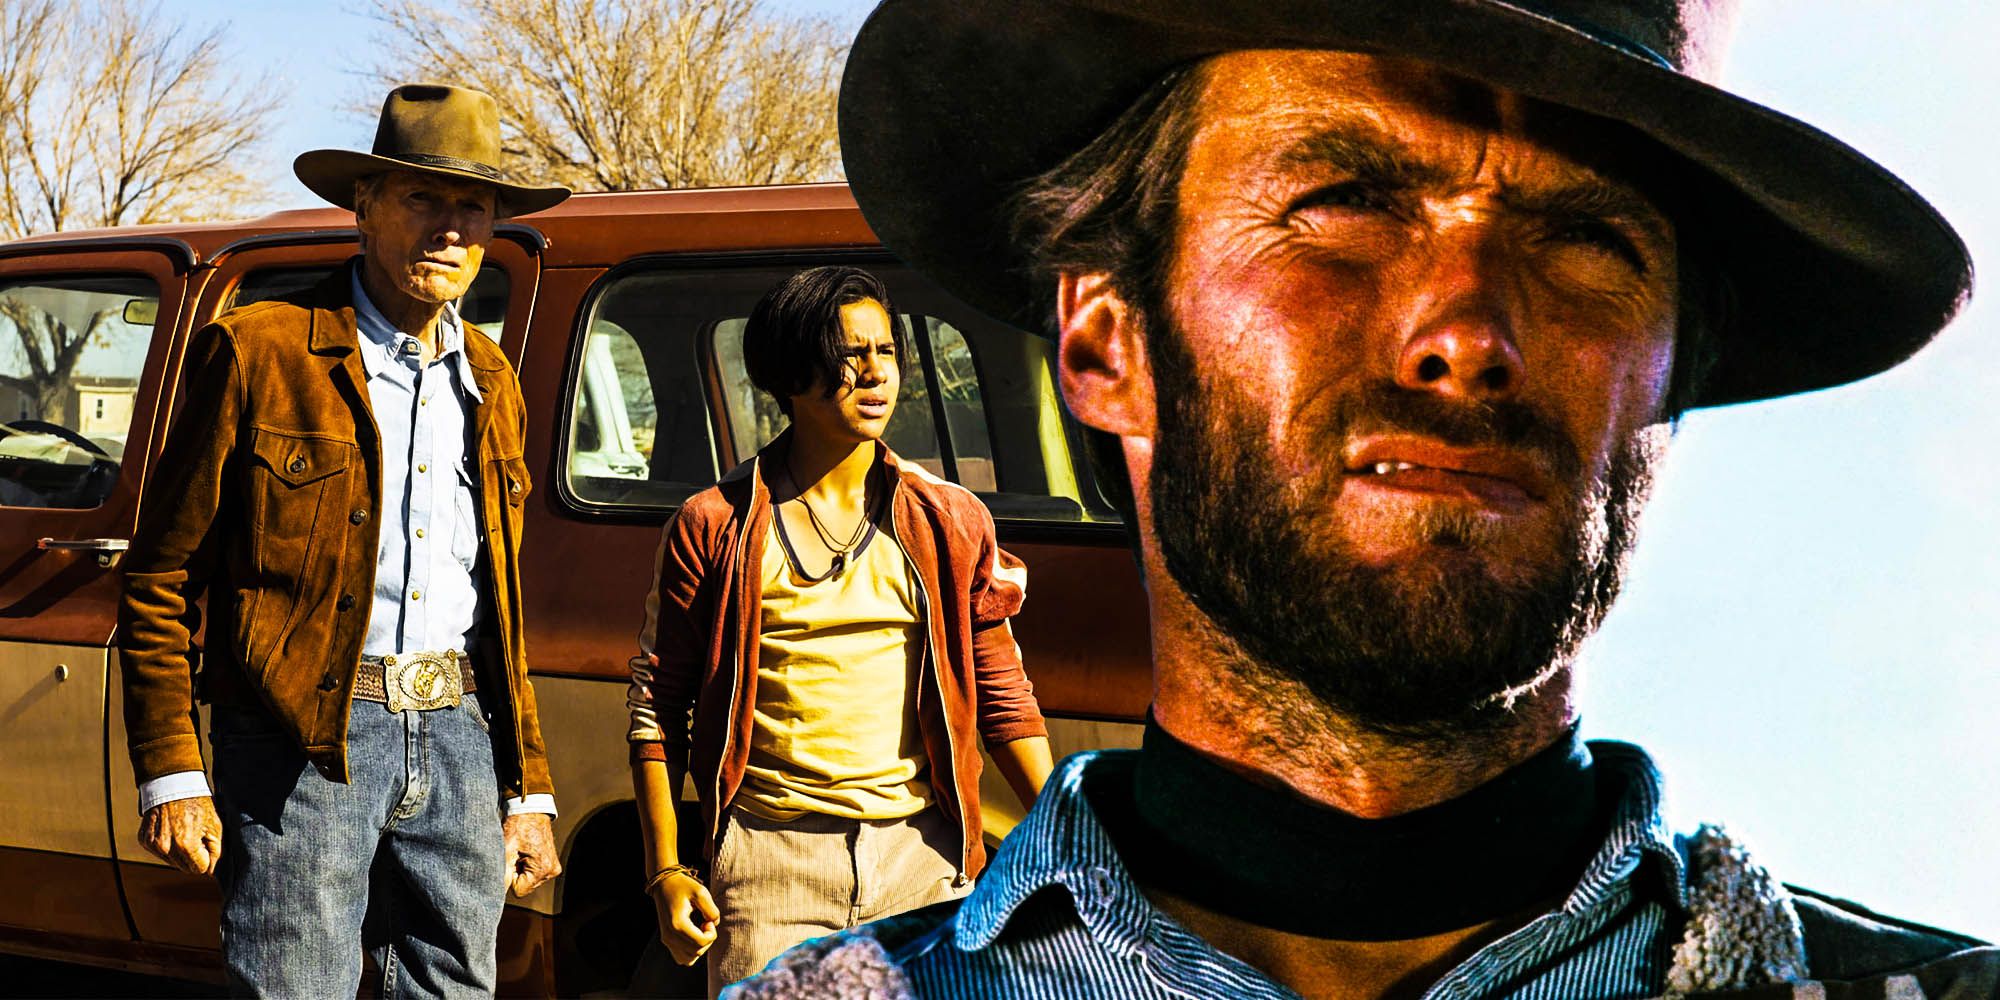 Cry macho is better because it took Clint Eastwood long to make it